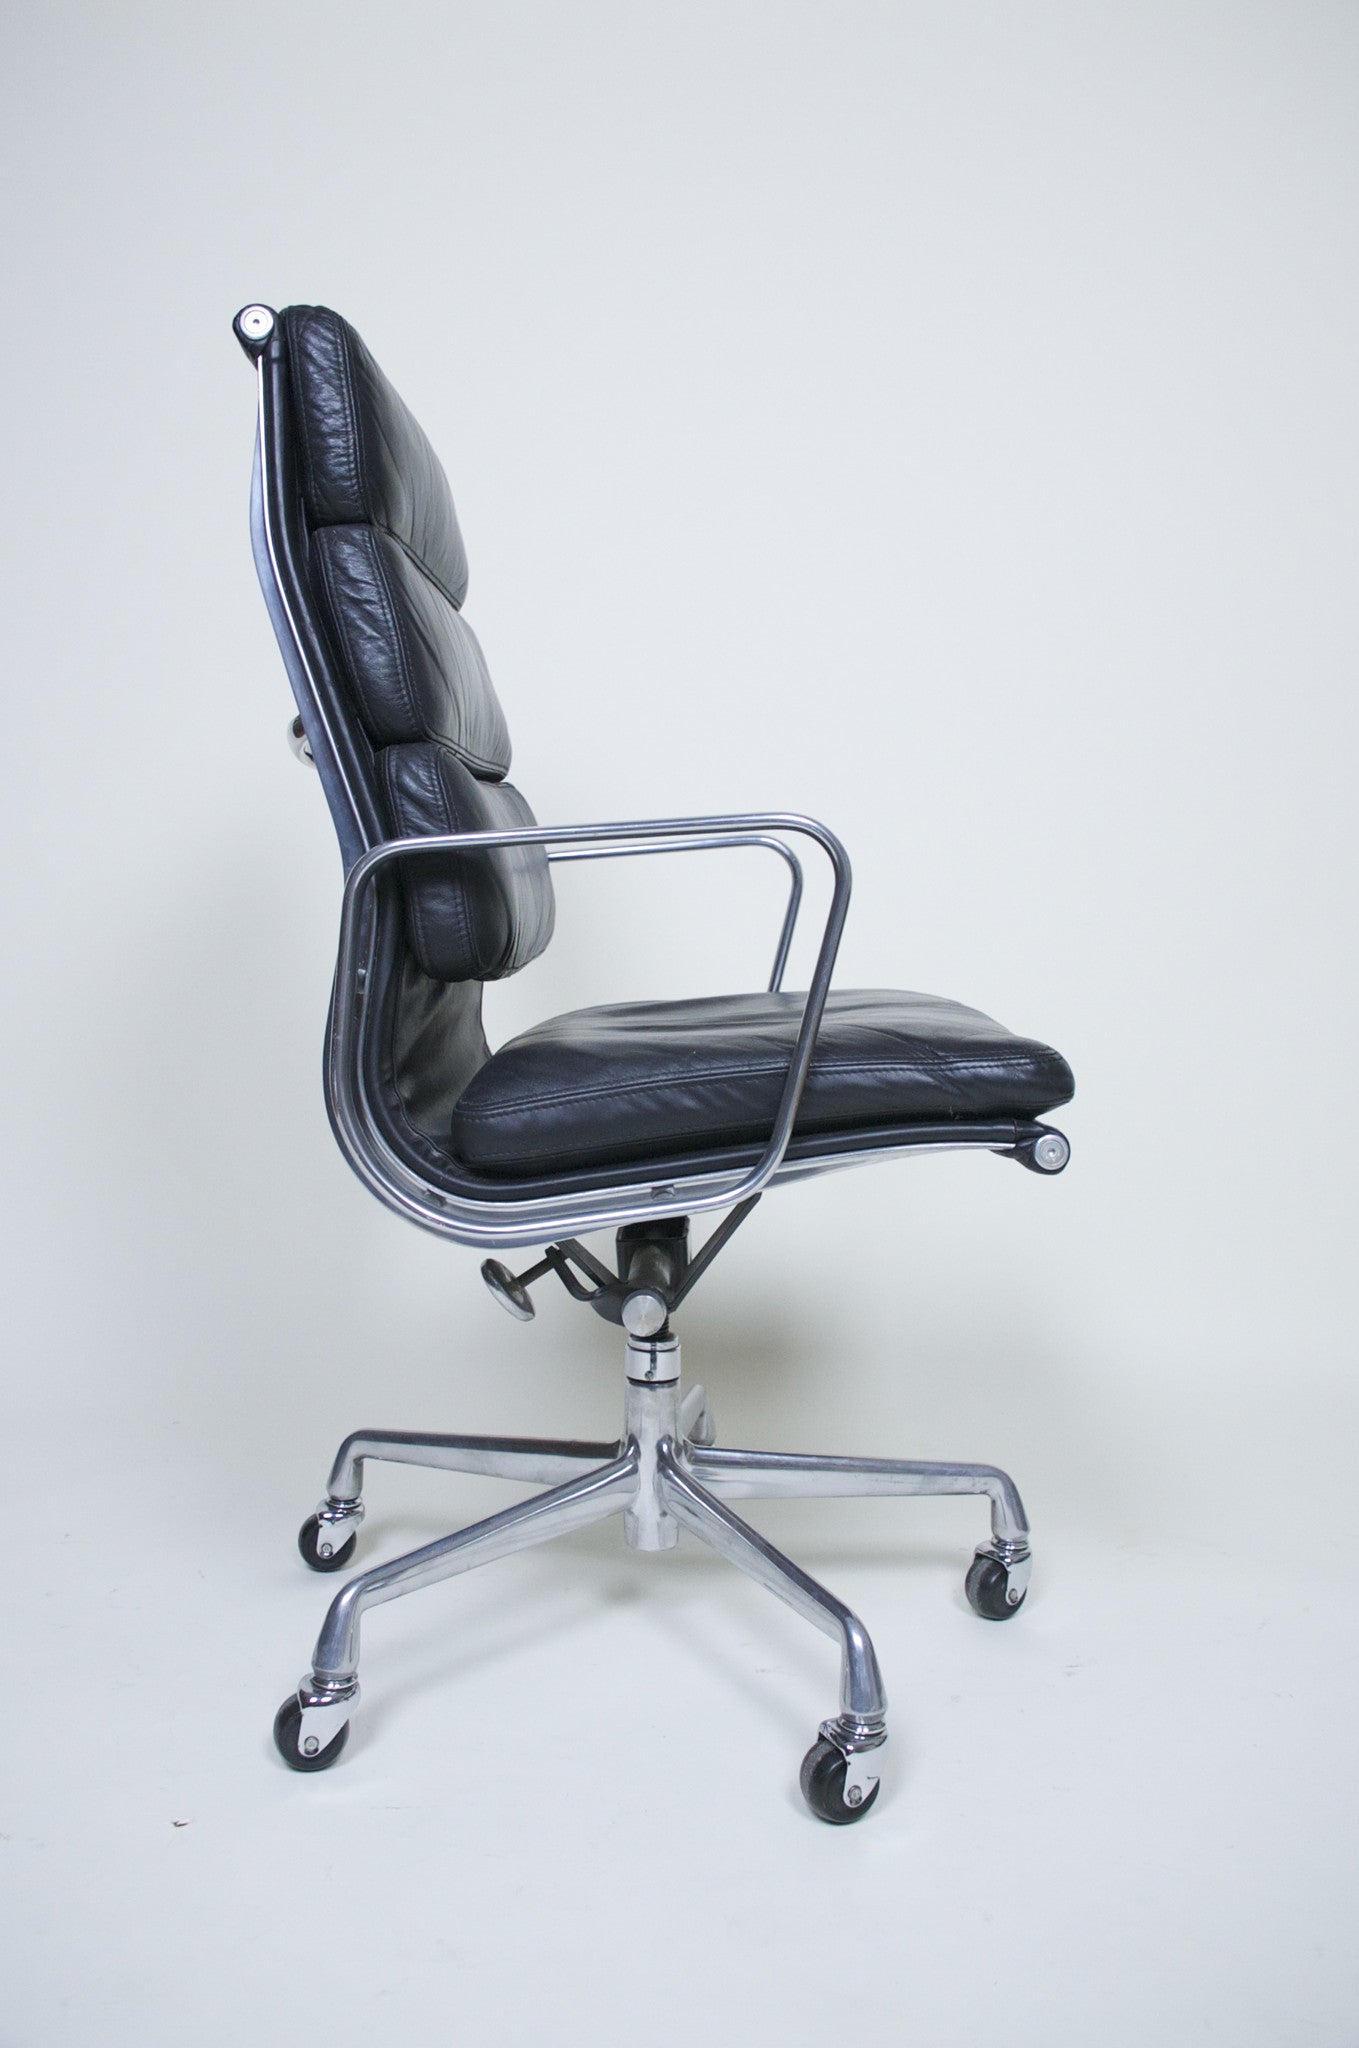 SOLD Eames Herman Miller Soft Pad High Back Aluminum Group Executive Chair